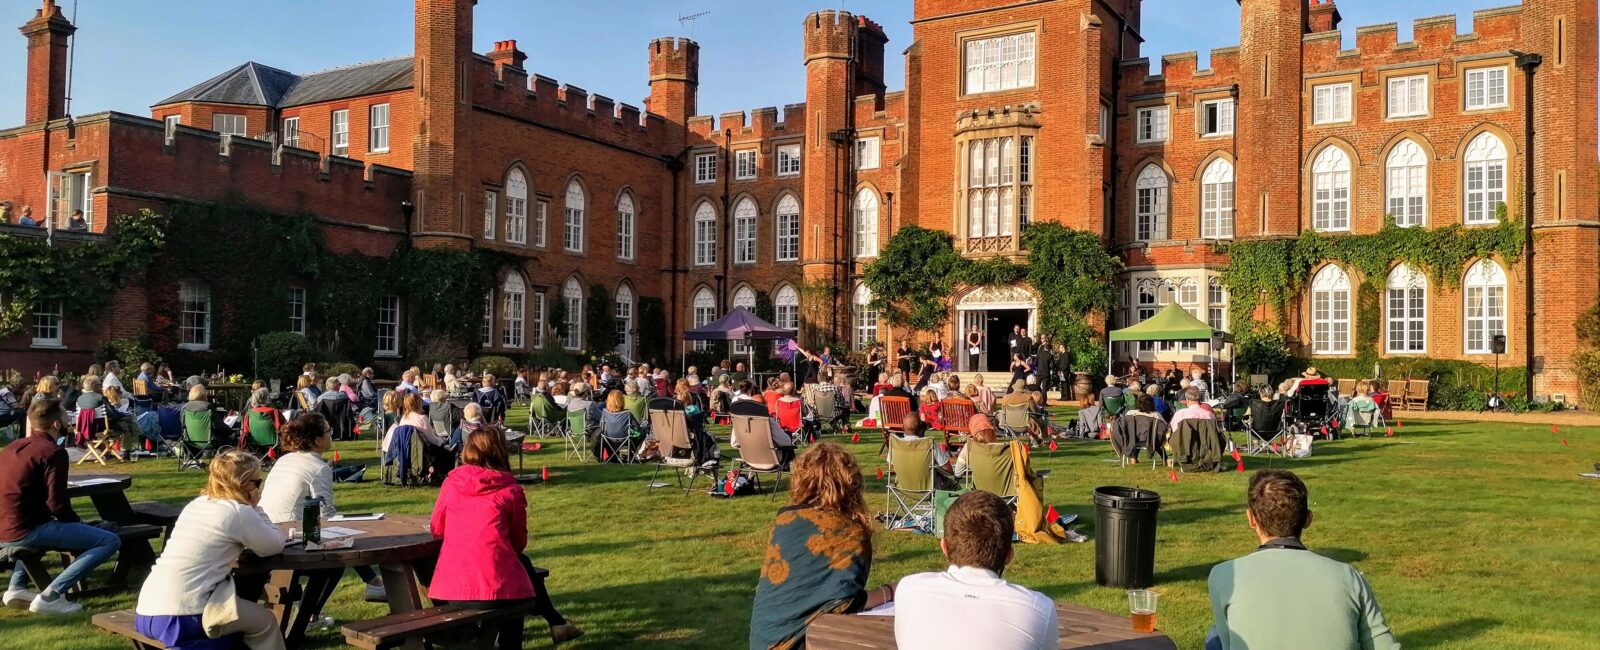 Guests watching 'Conference of the Birds' in the grounds of Cumberland Lodge